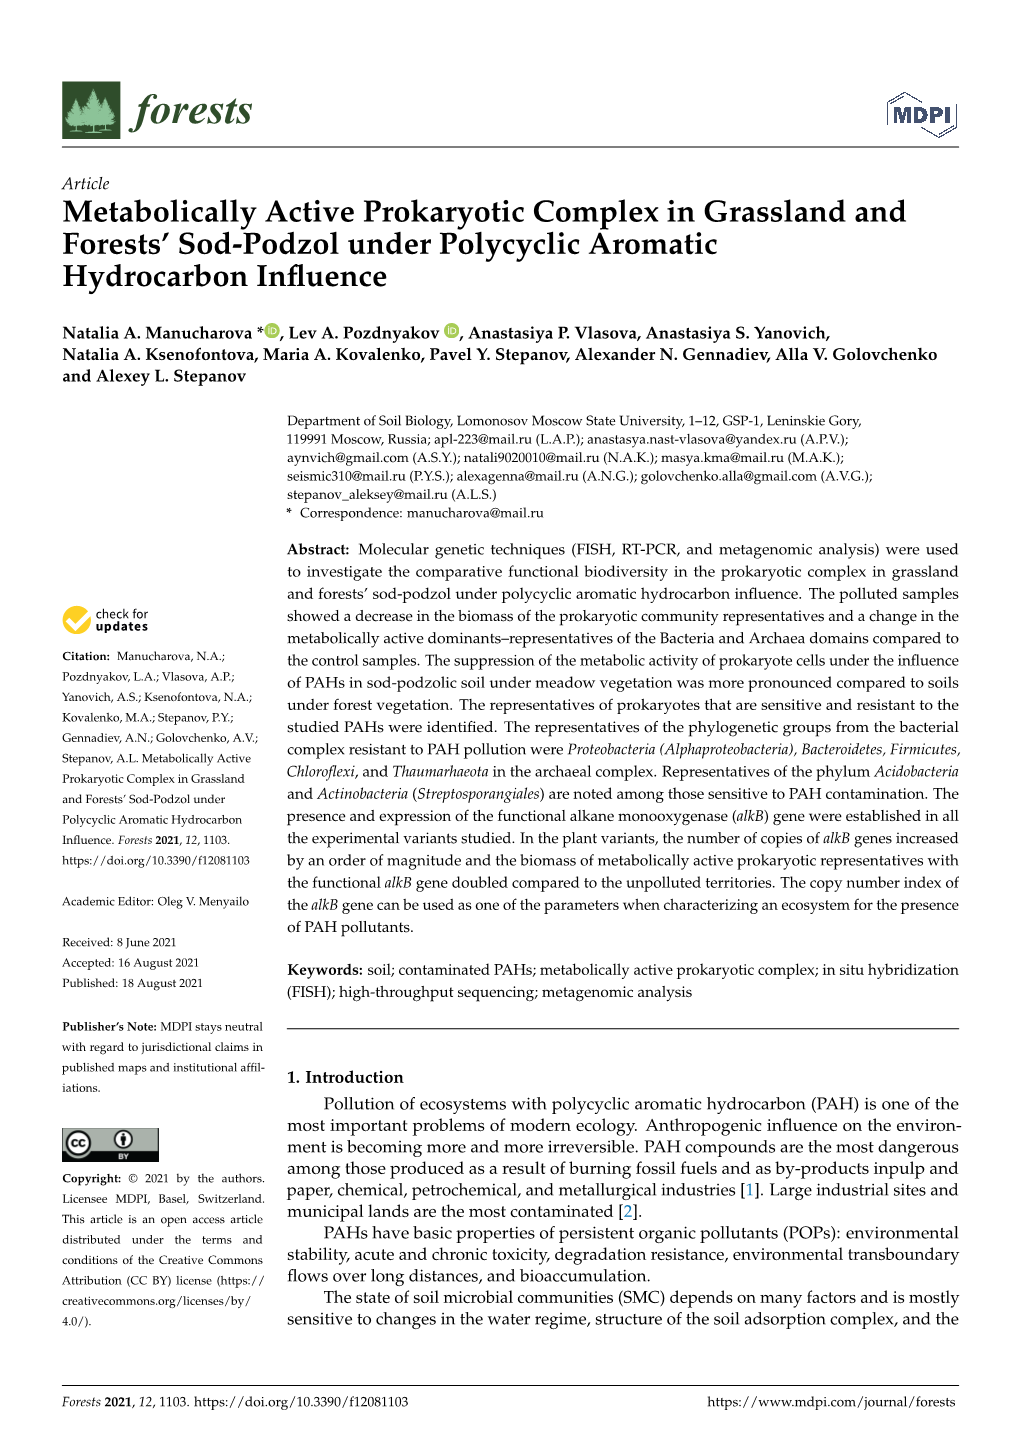 Metabolically Active Prokaryotic Complex in Grassland and Forests’ Sod-Podzol Under Polycyclic Aromatic Hydrocarbon Inﬂuence